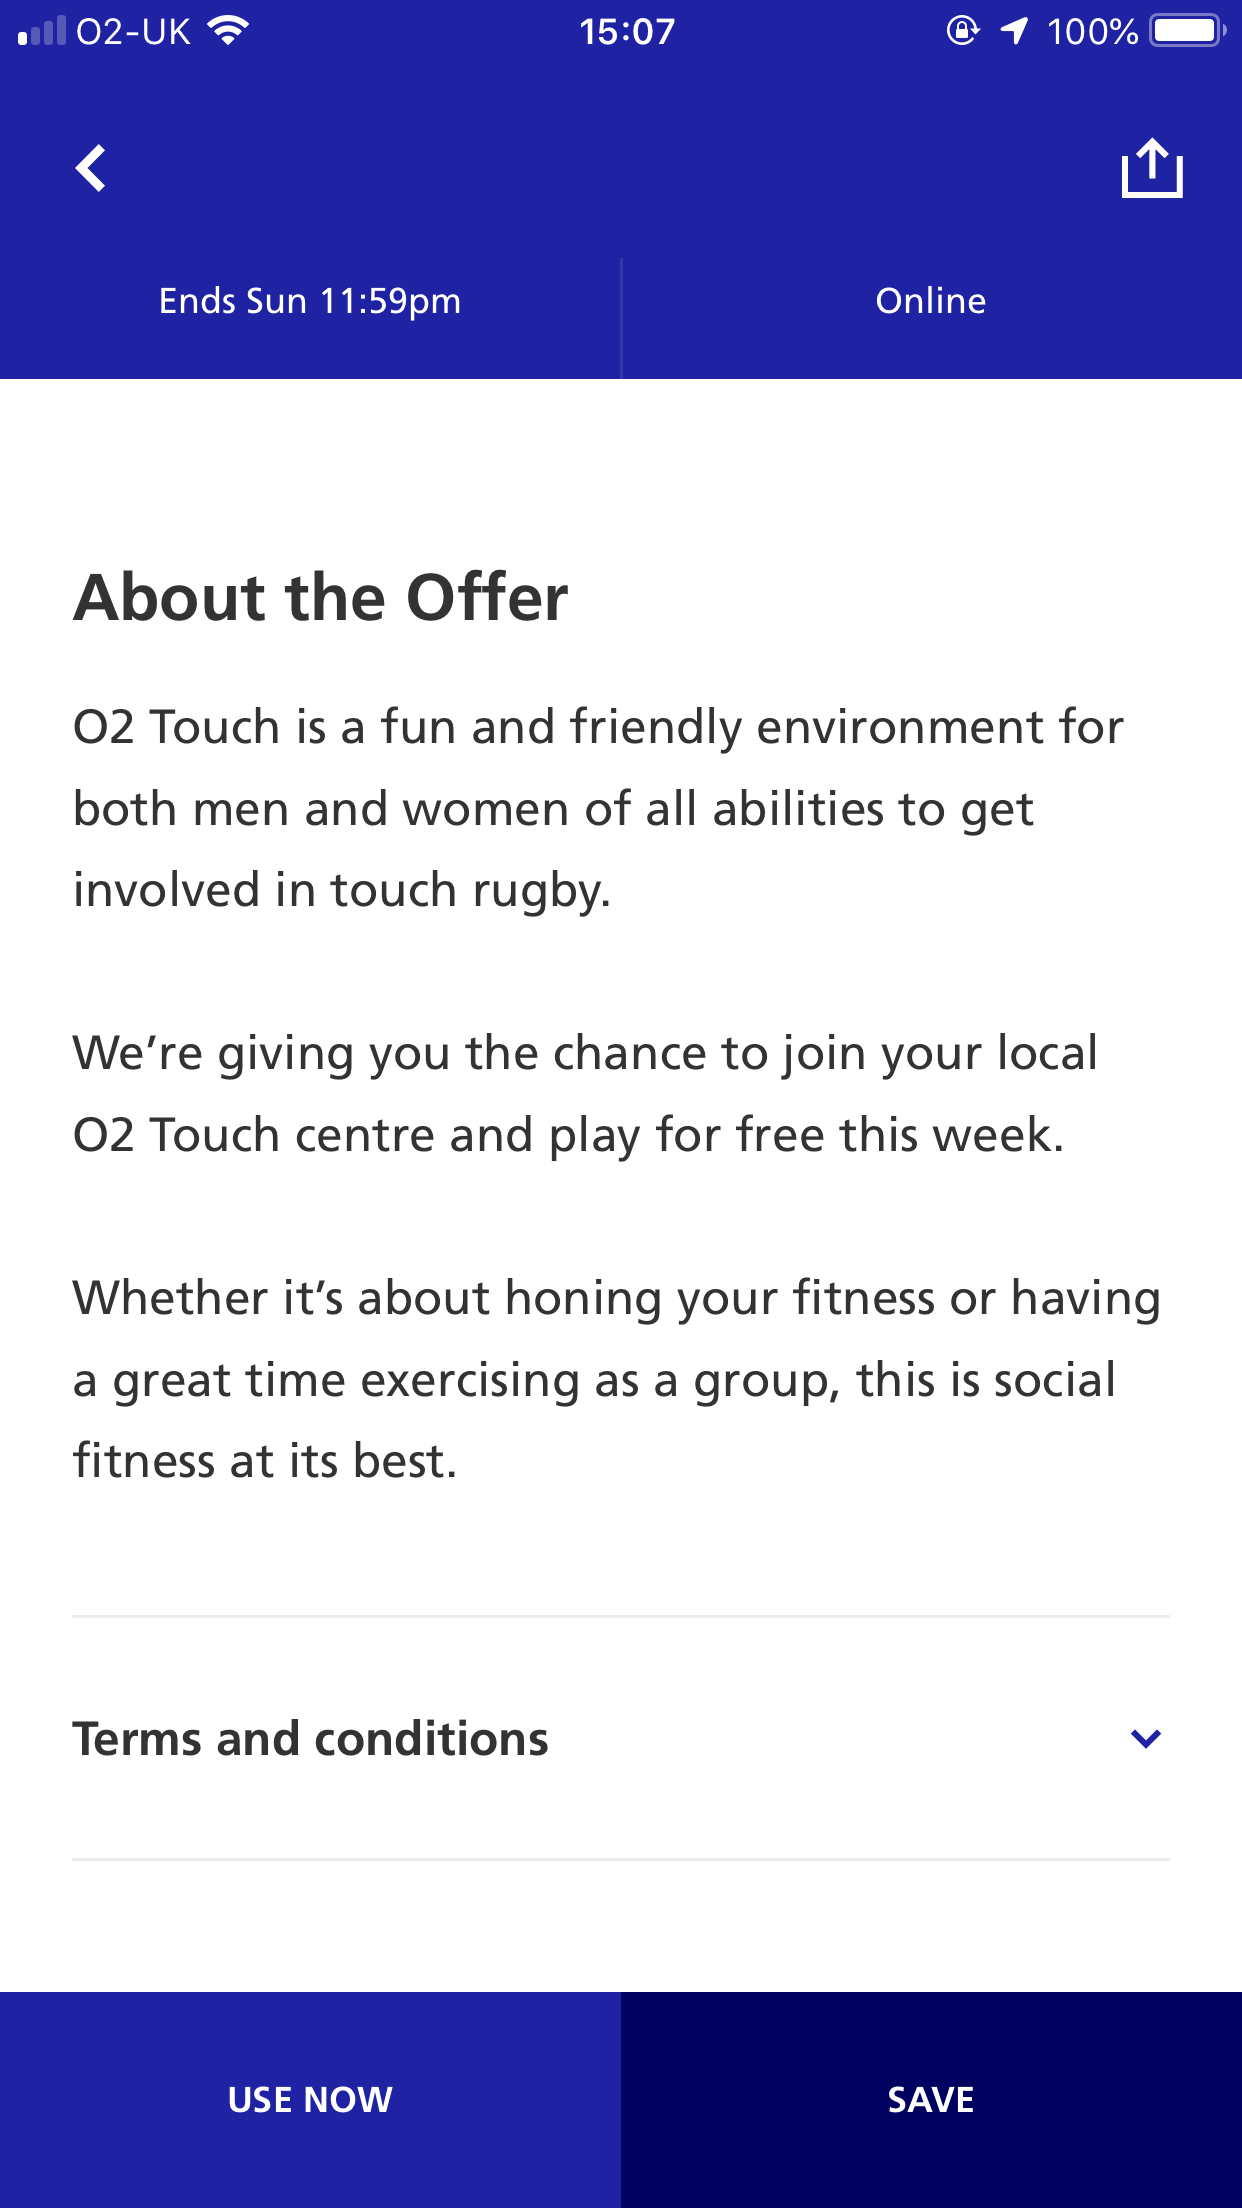 Offer details screenshot from the Priority app